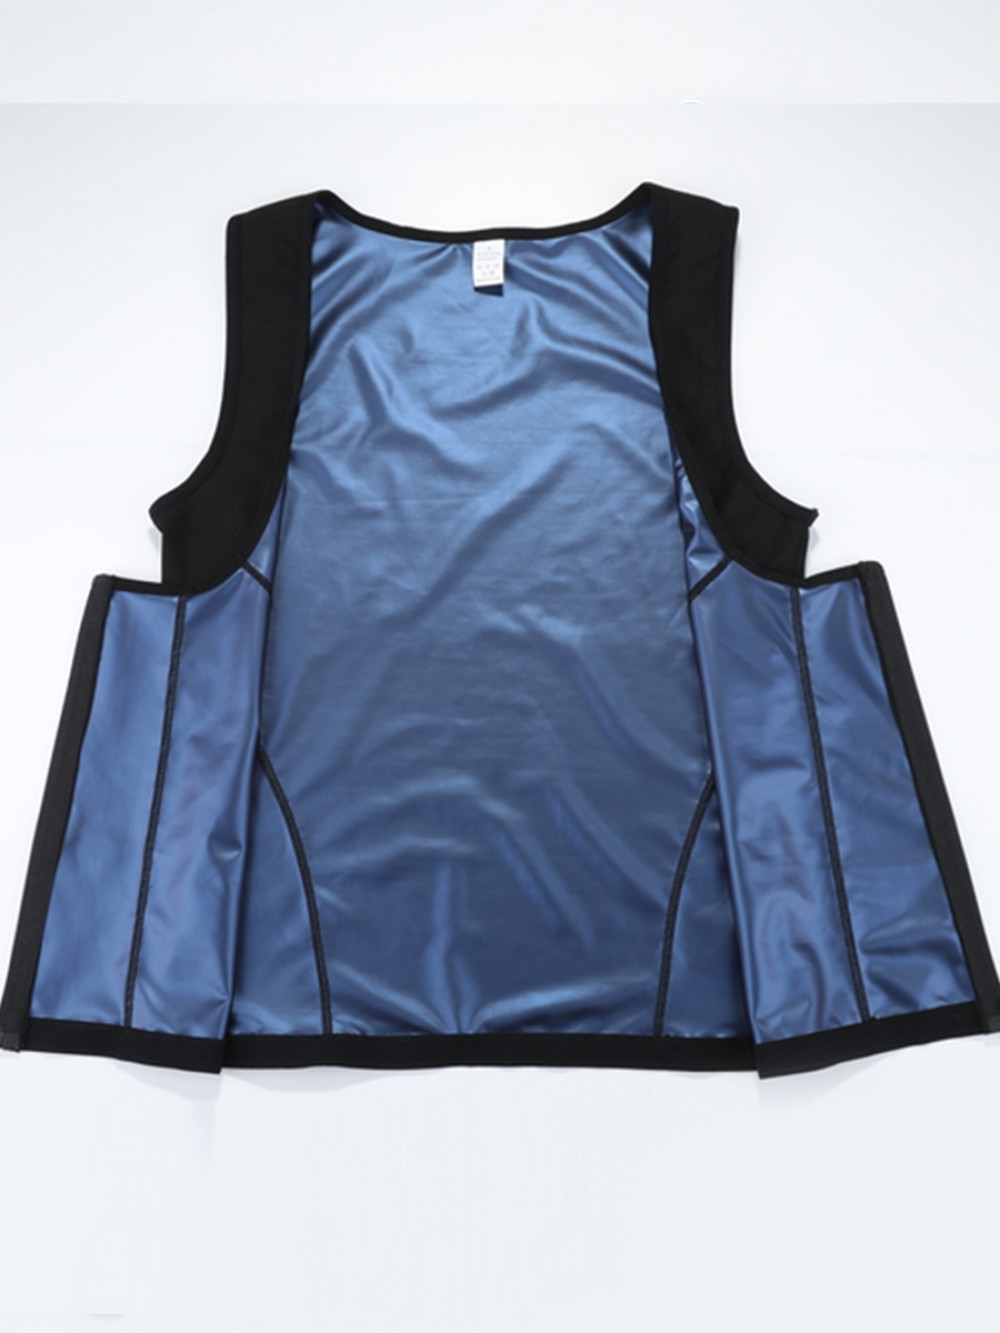 Blue Vest With Zipper Large Size Slimming Stomach